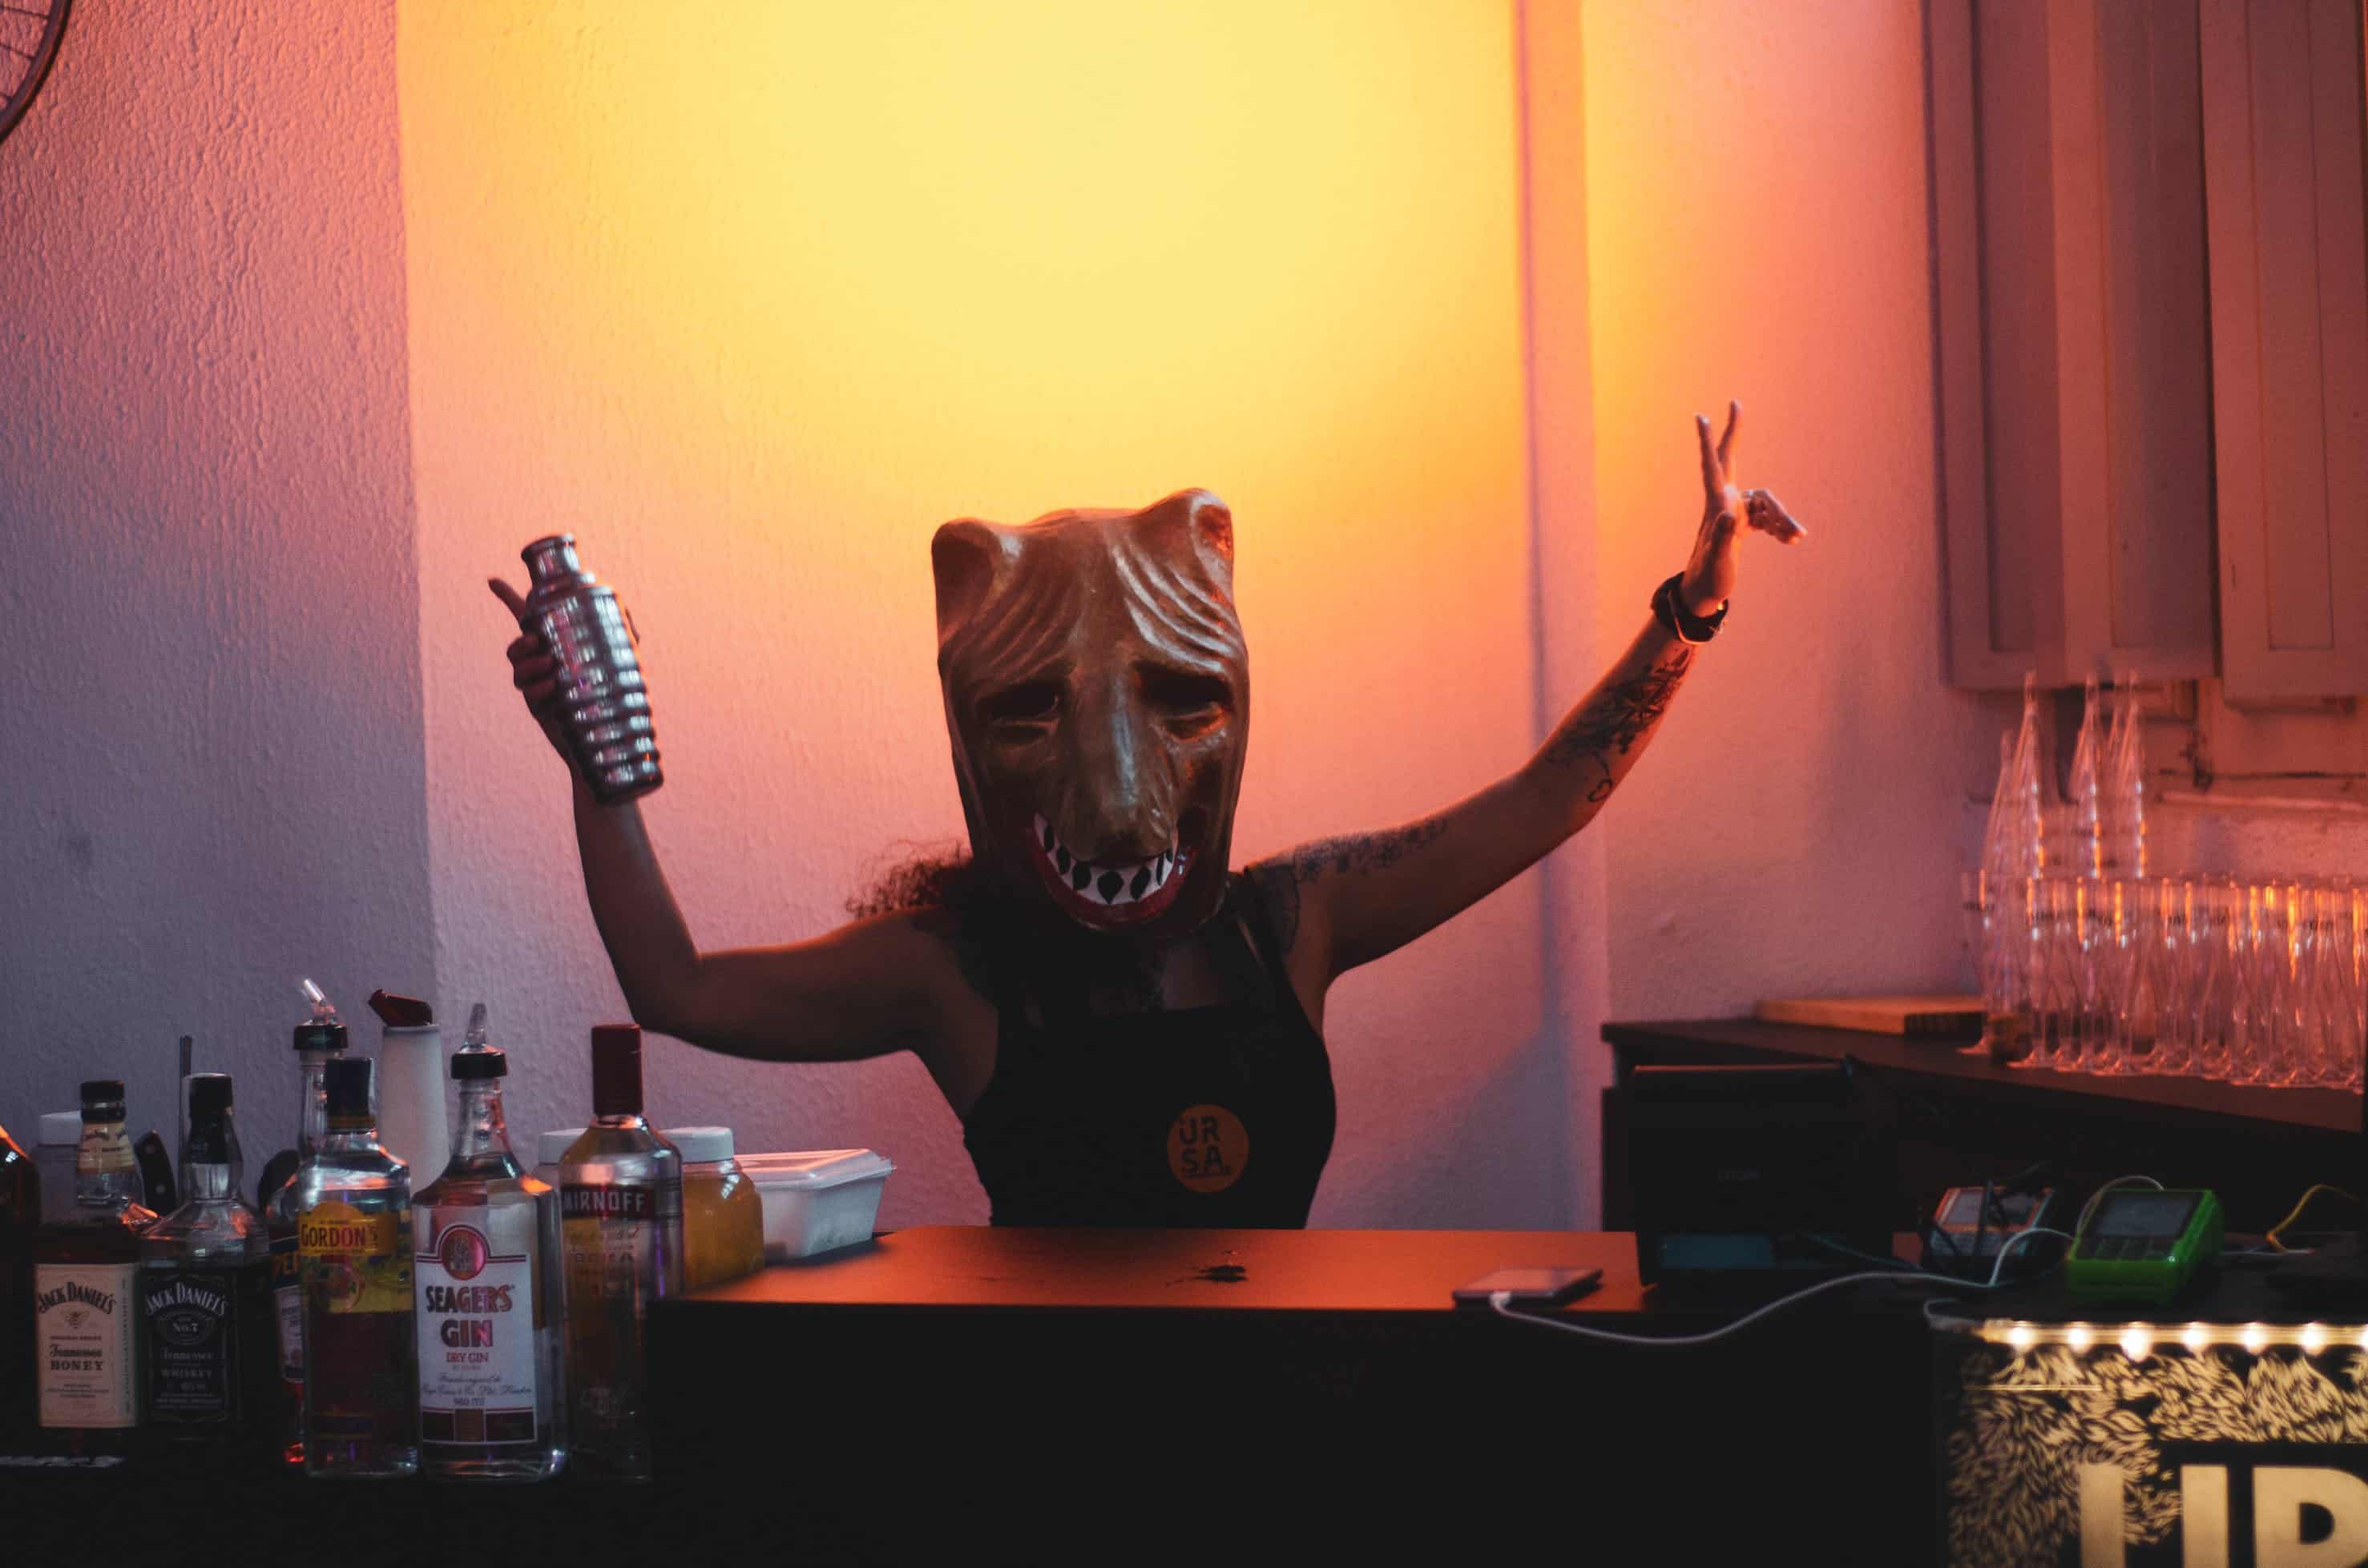 A bartender dressed as a bear at a party